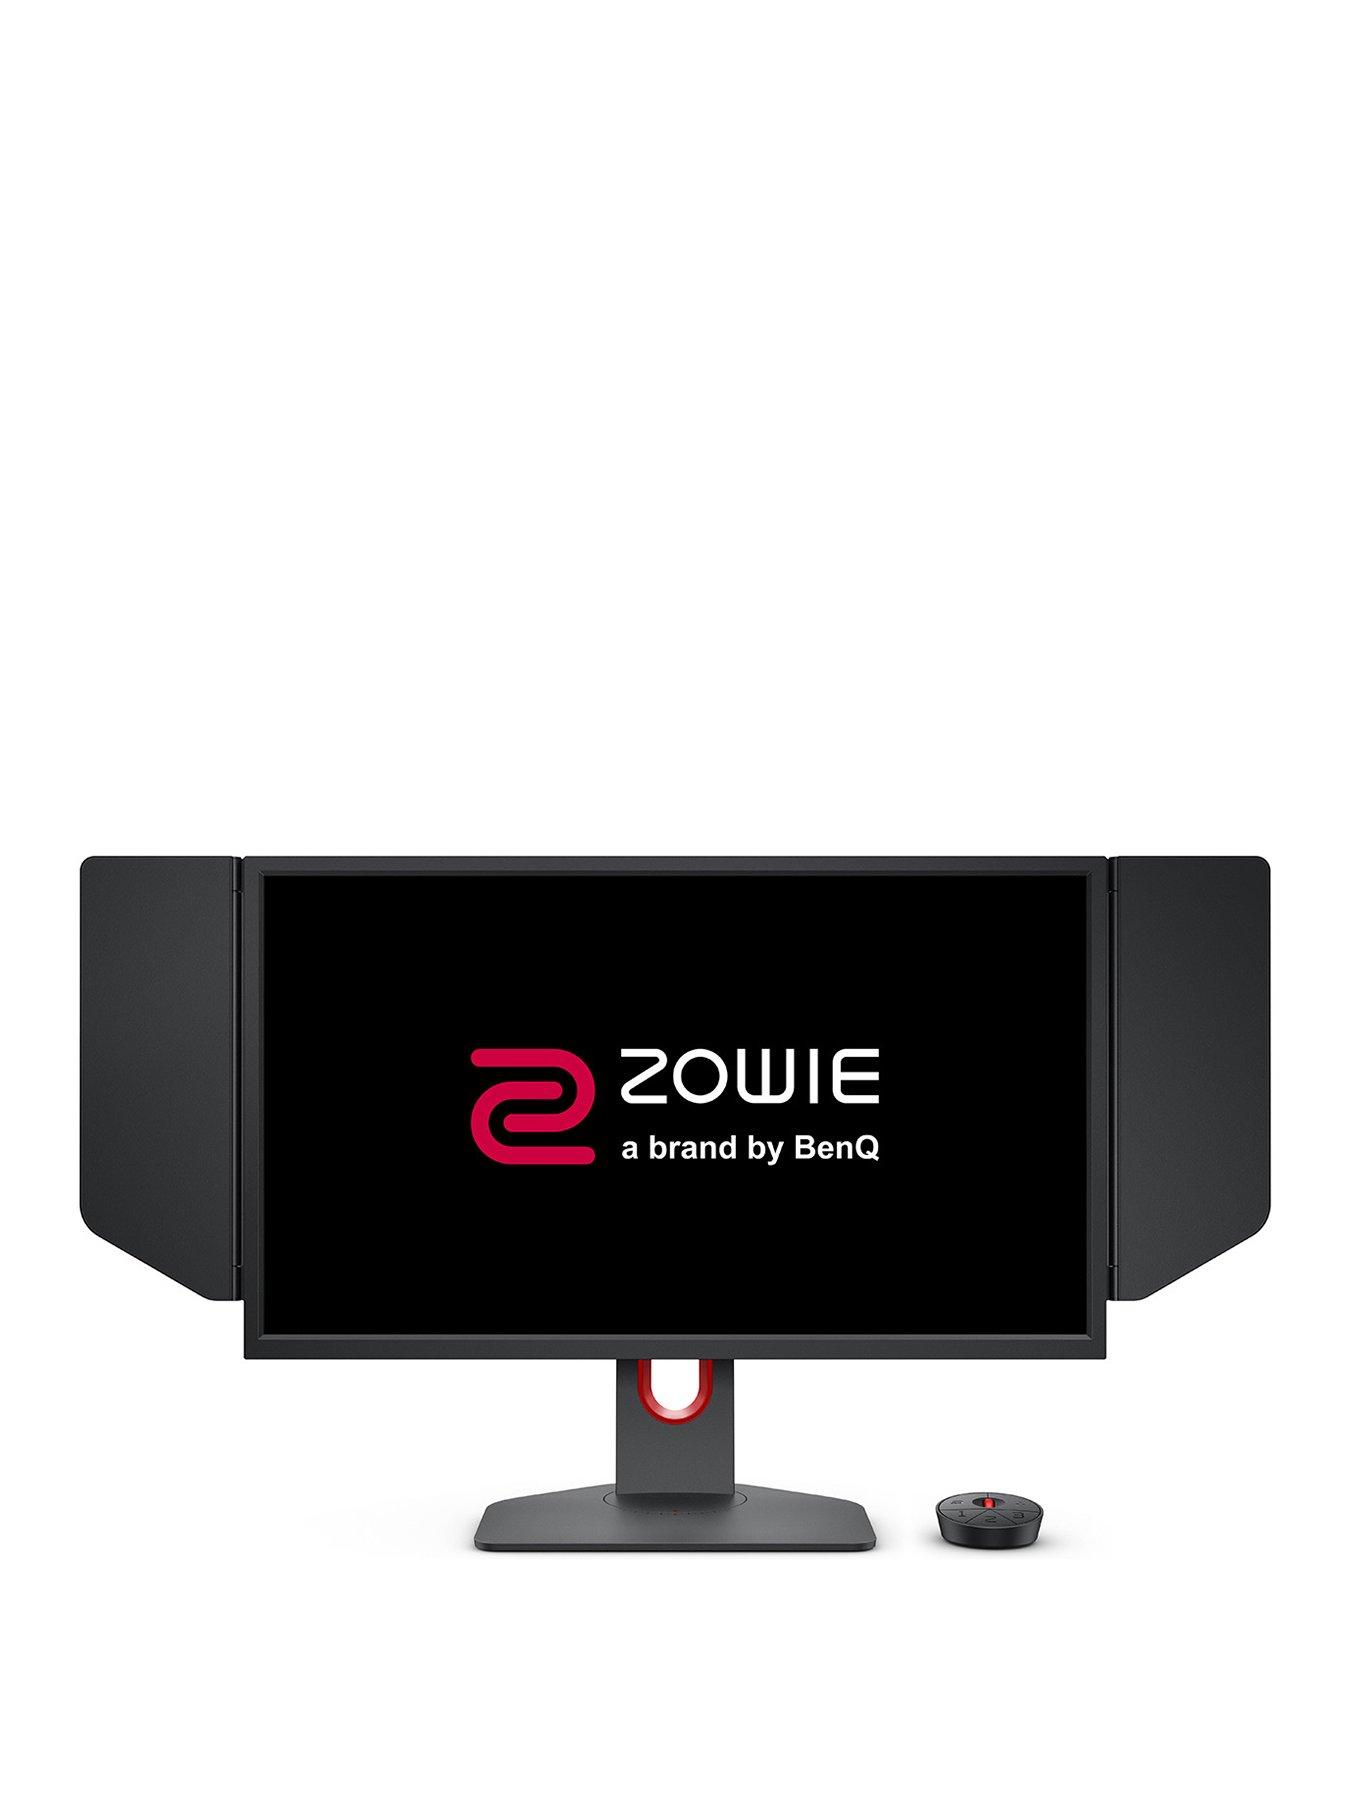 BenQ UK - Get this! Our PD3420Q monitor has 🖥21:9 Ultrawide